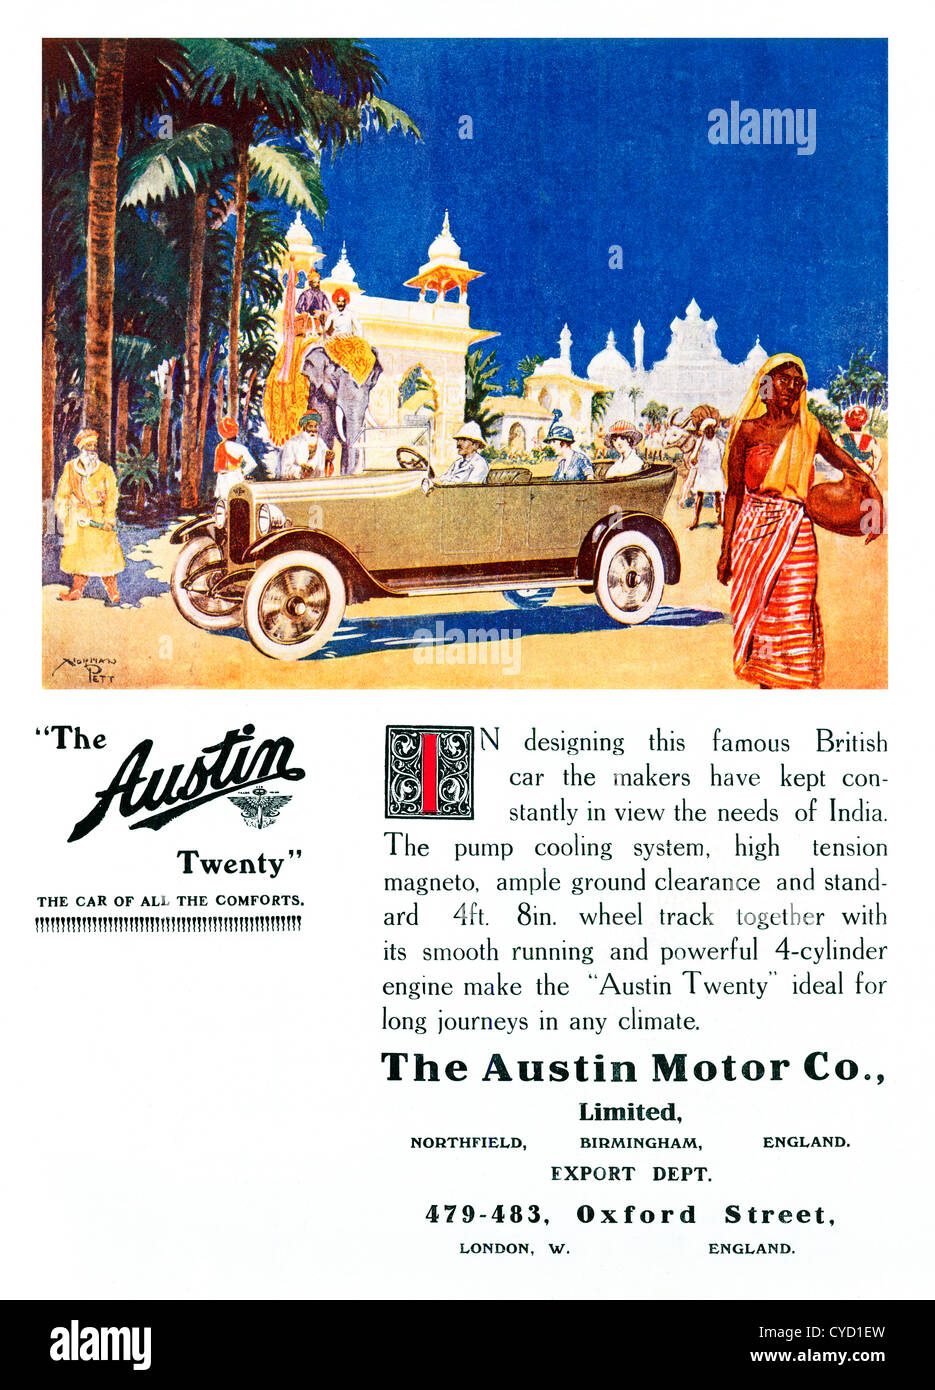 Austin Twenty, 1919 advert for the English car in India, driving in an Indian road, elephant and temple behind Stock Photo